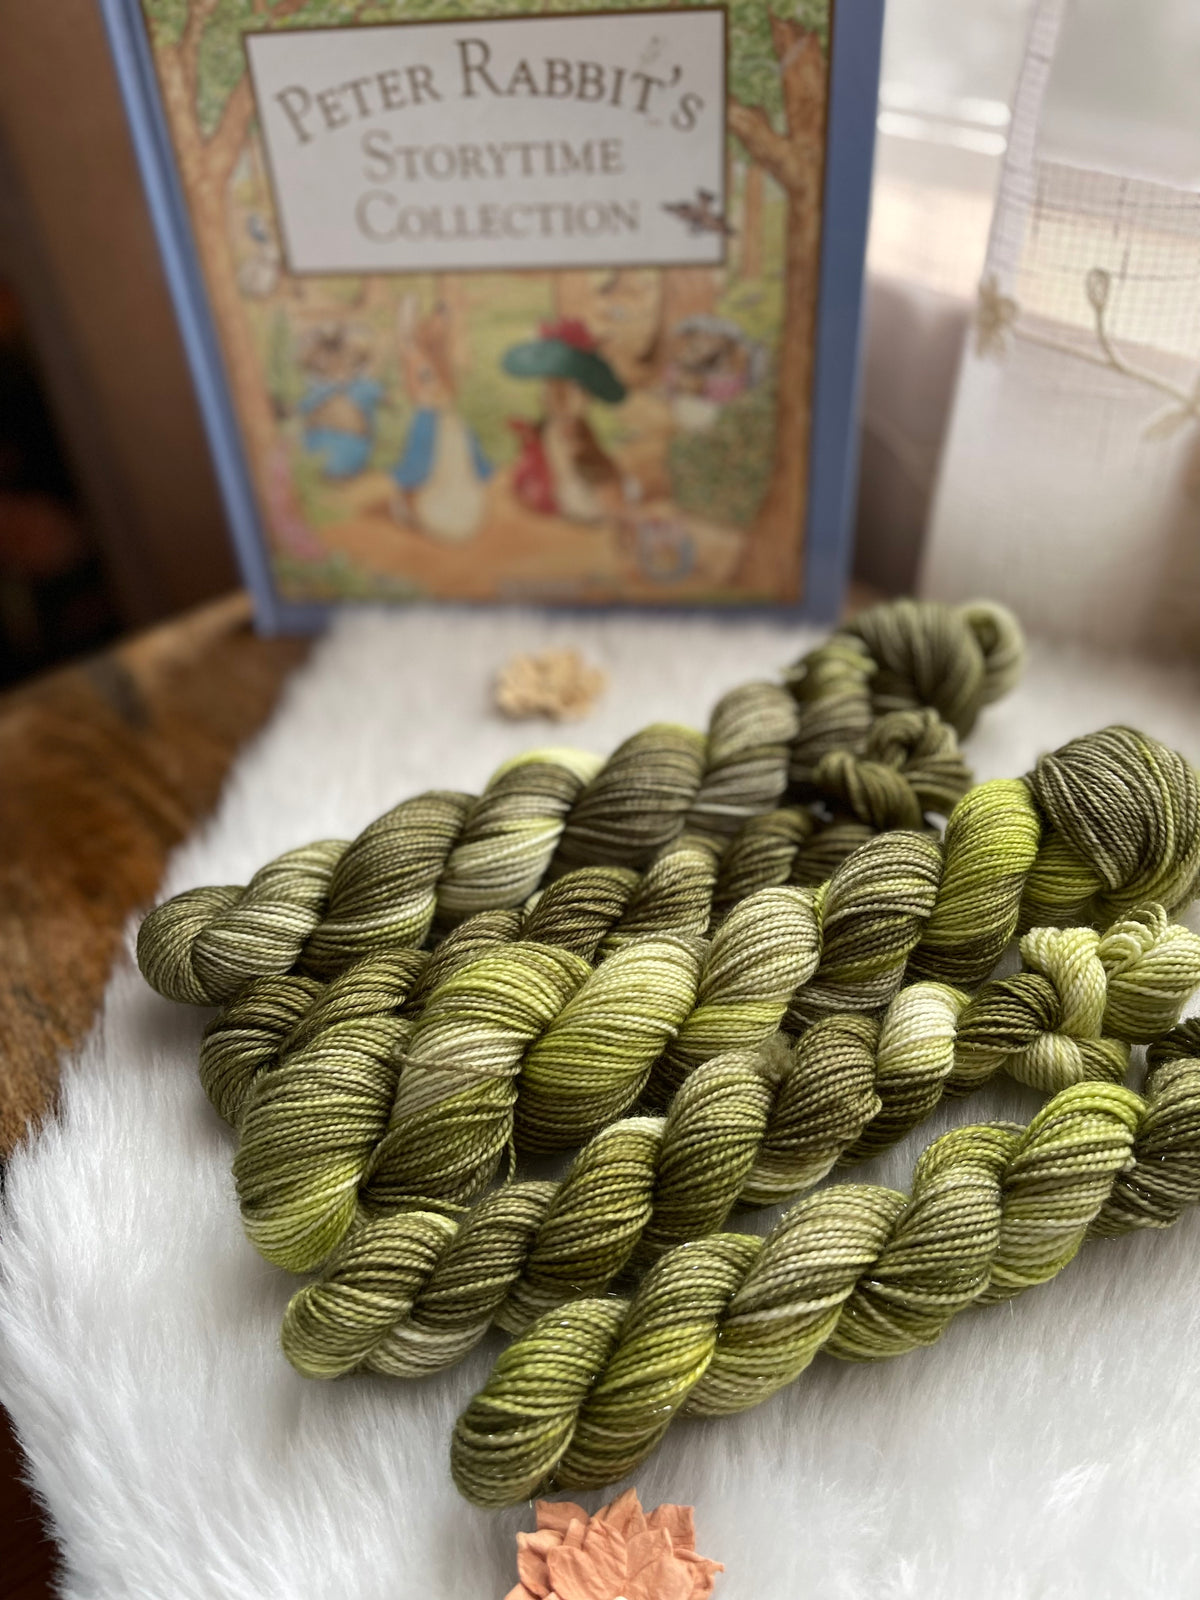 PICKLES  -Dyed to Order - Hand Dyed Yarn Skein